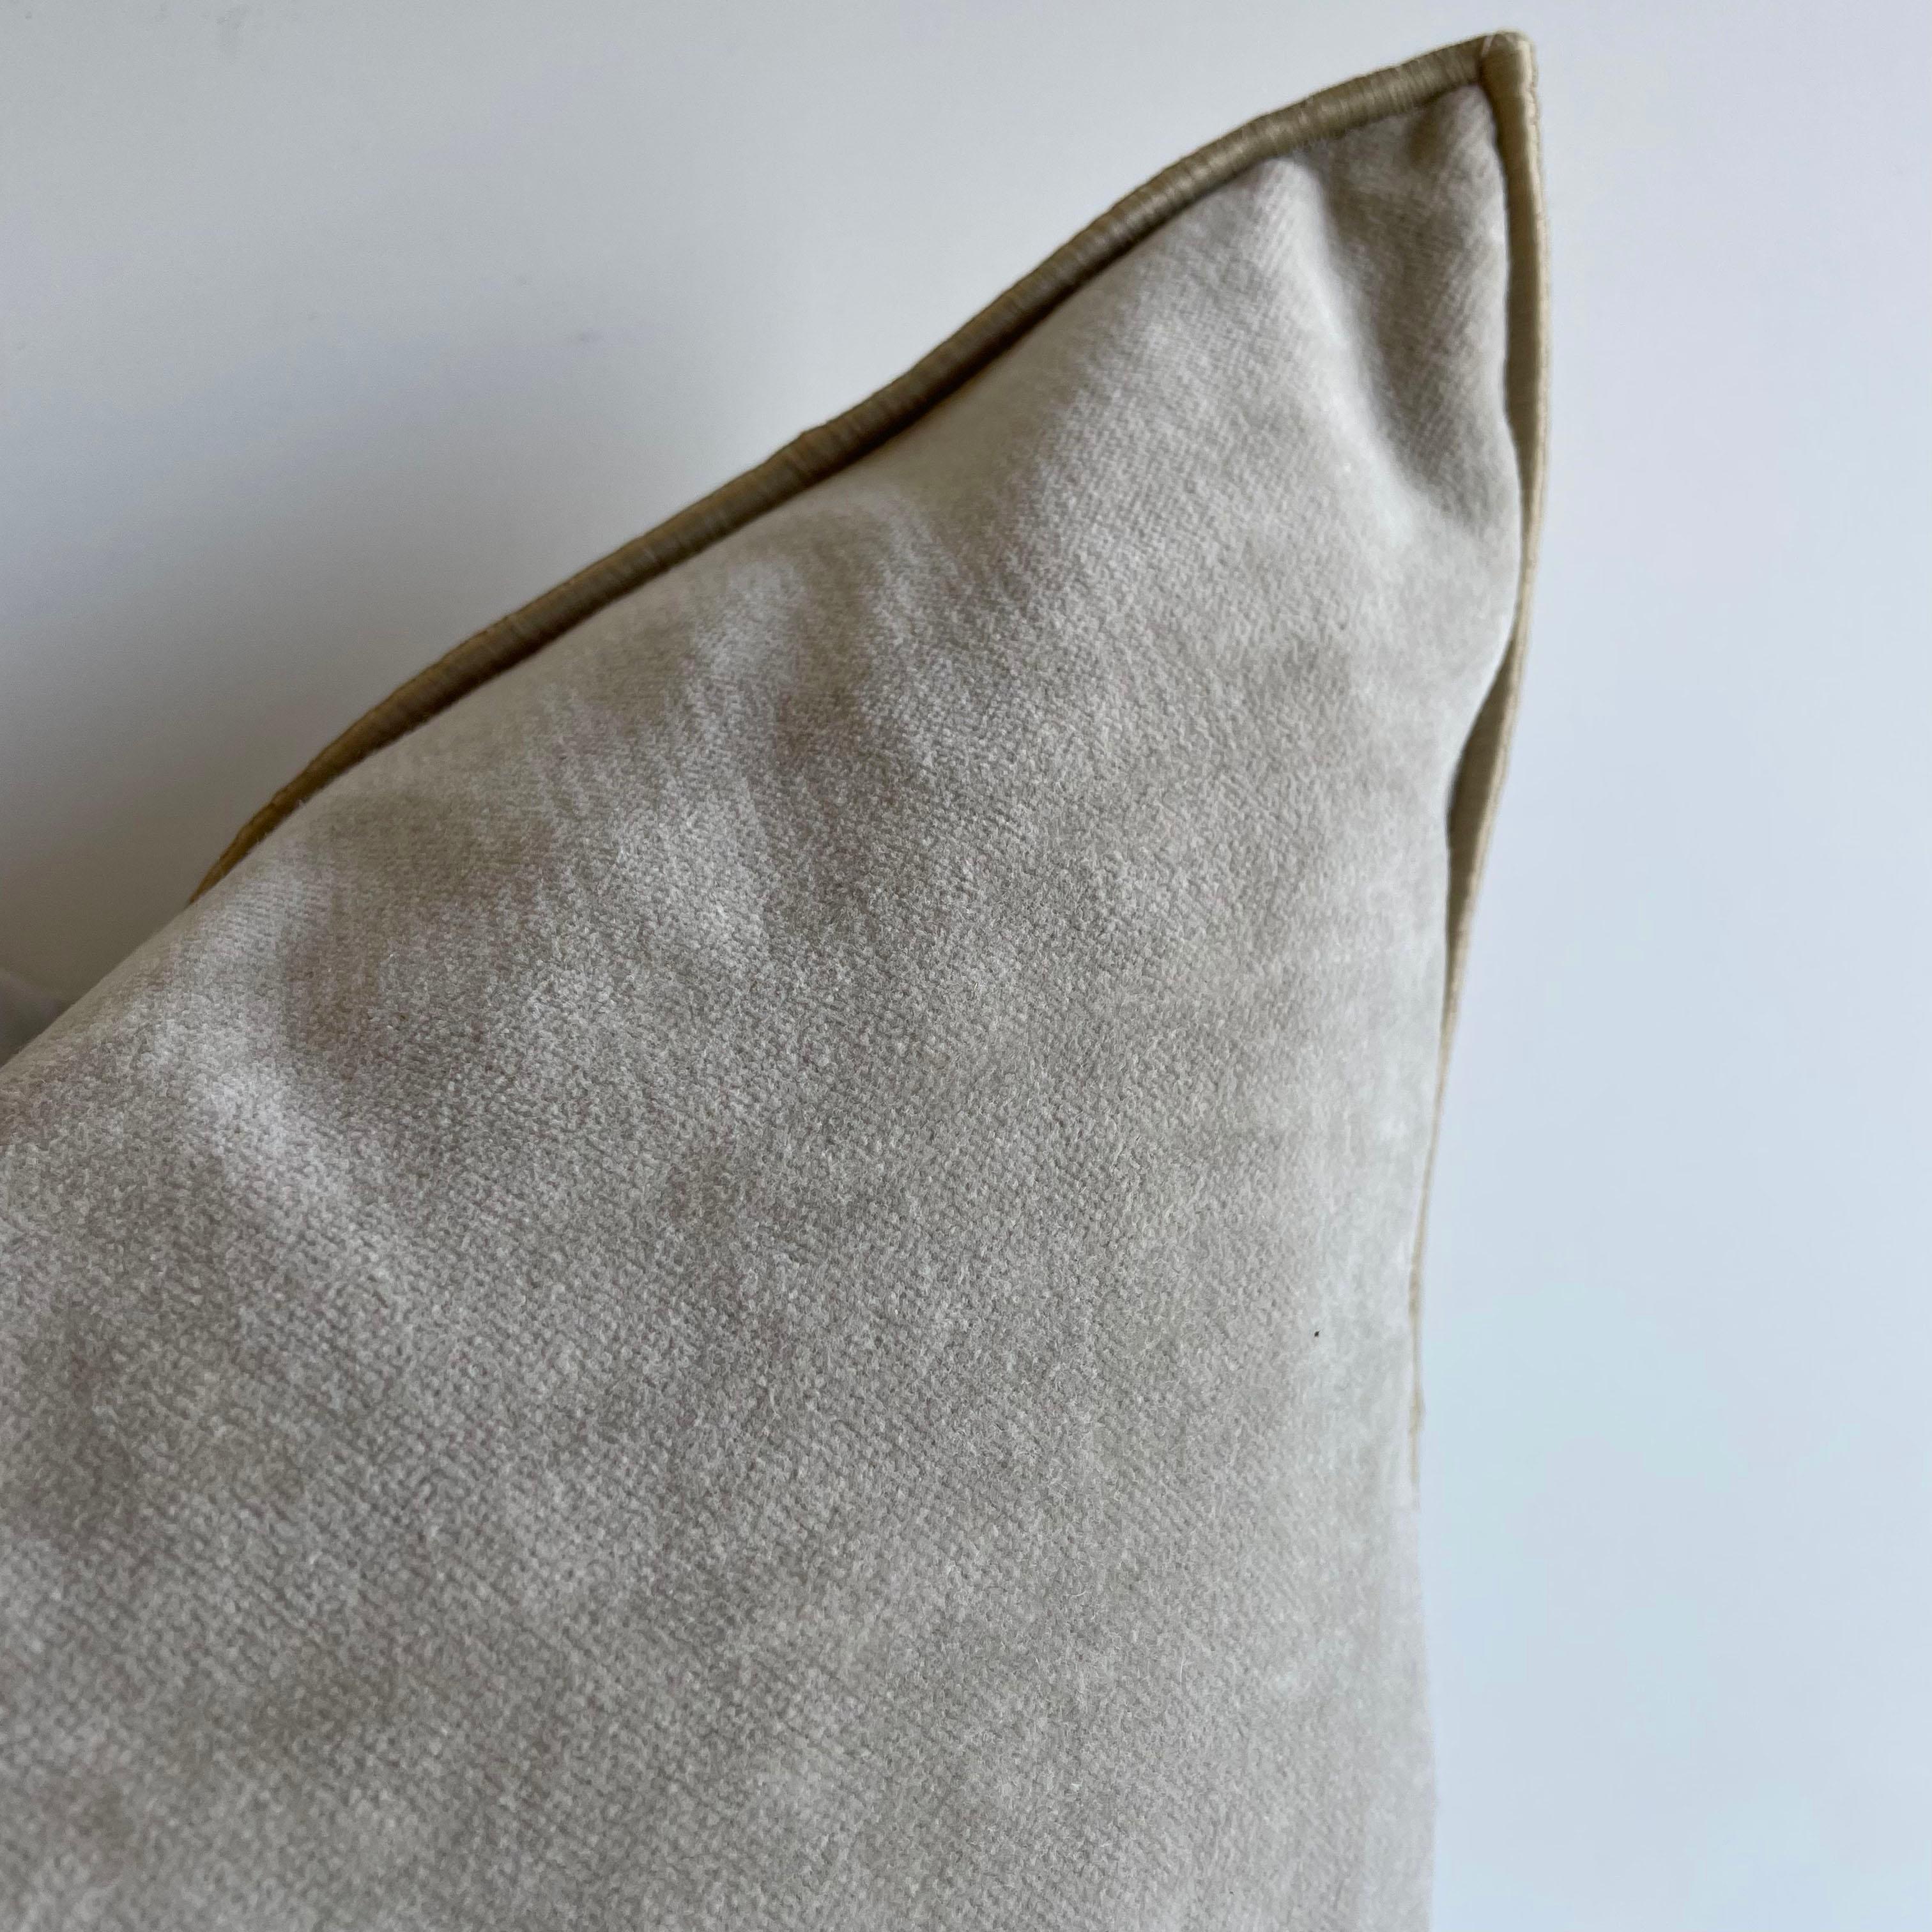 Beautiful French soft grey velvet pillow with binded edge. Metal zipper closure, and leather pull. Custom made in Paris, France. Includes down feather insert. 

Size: 20